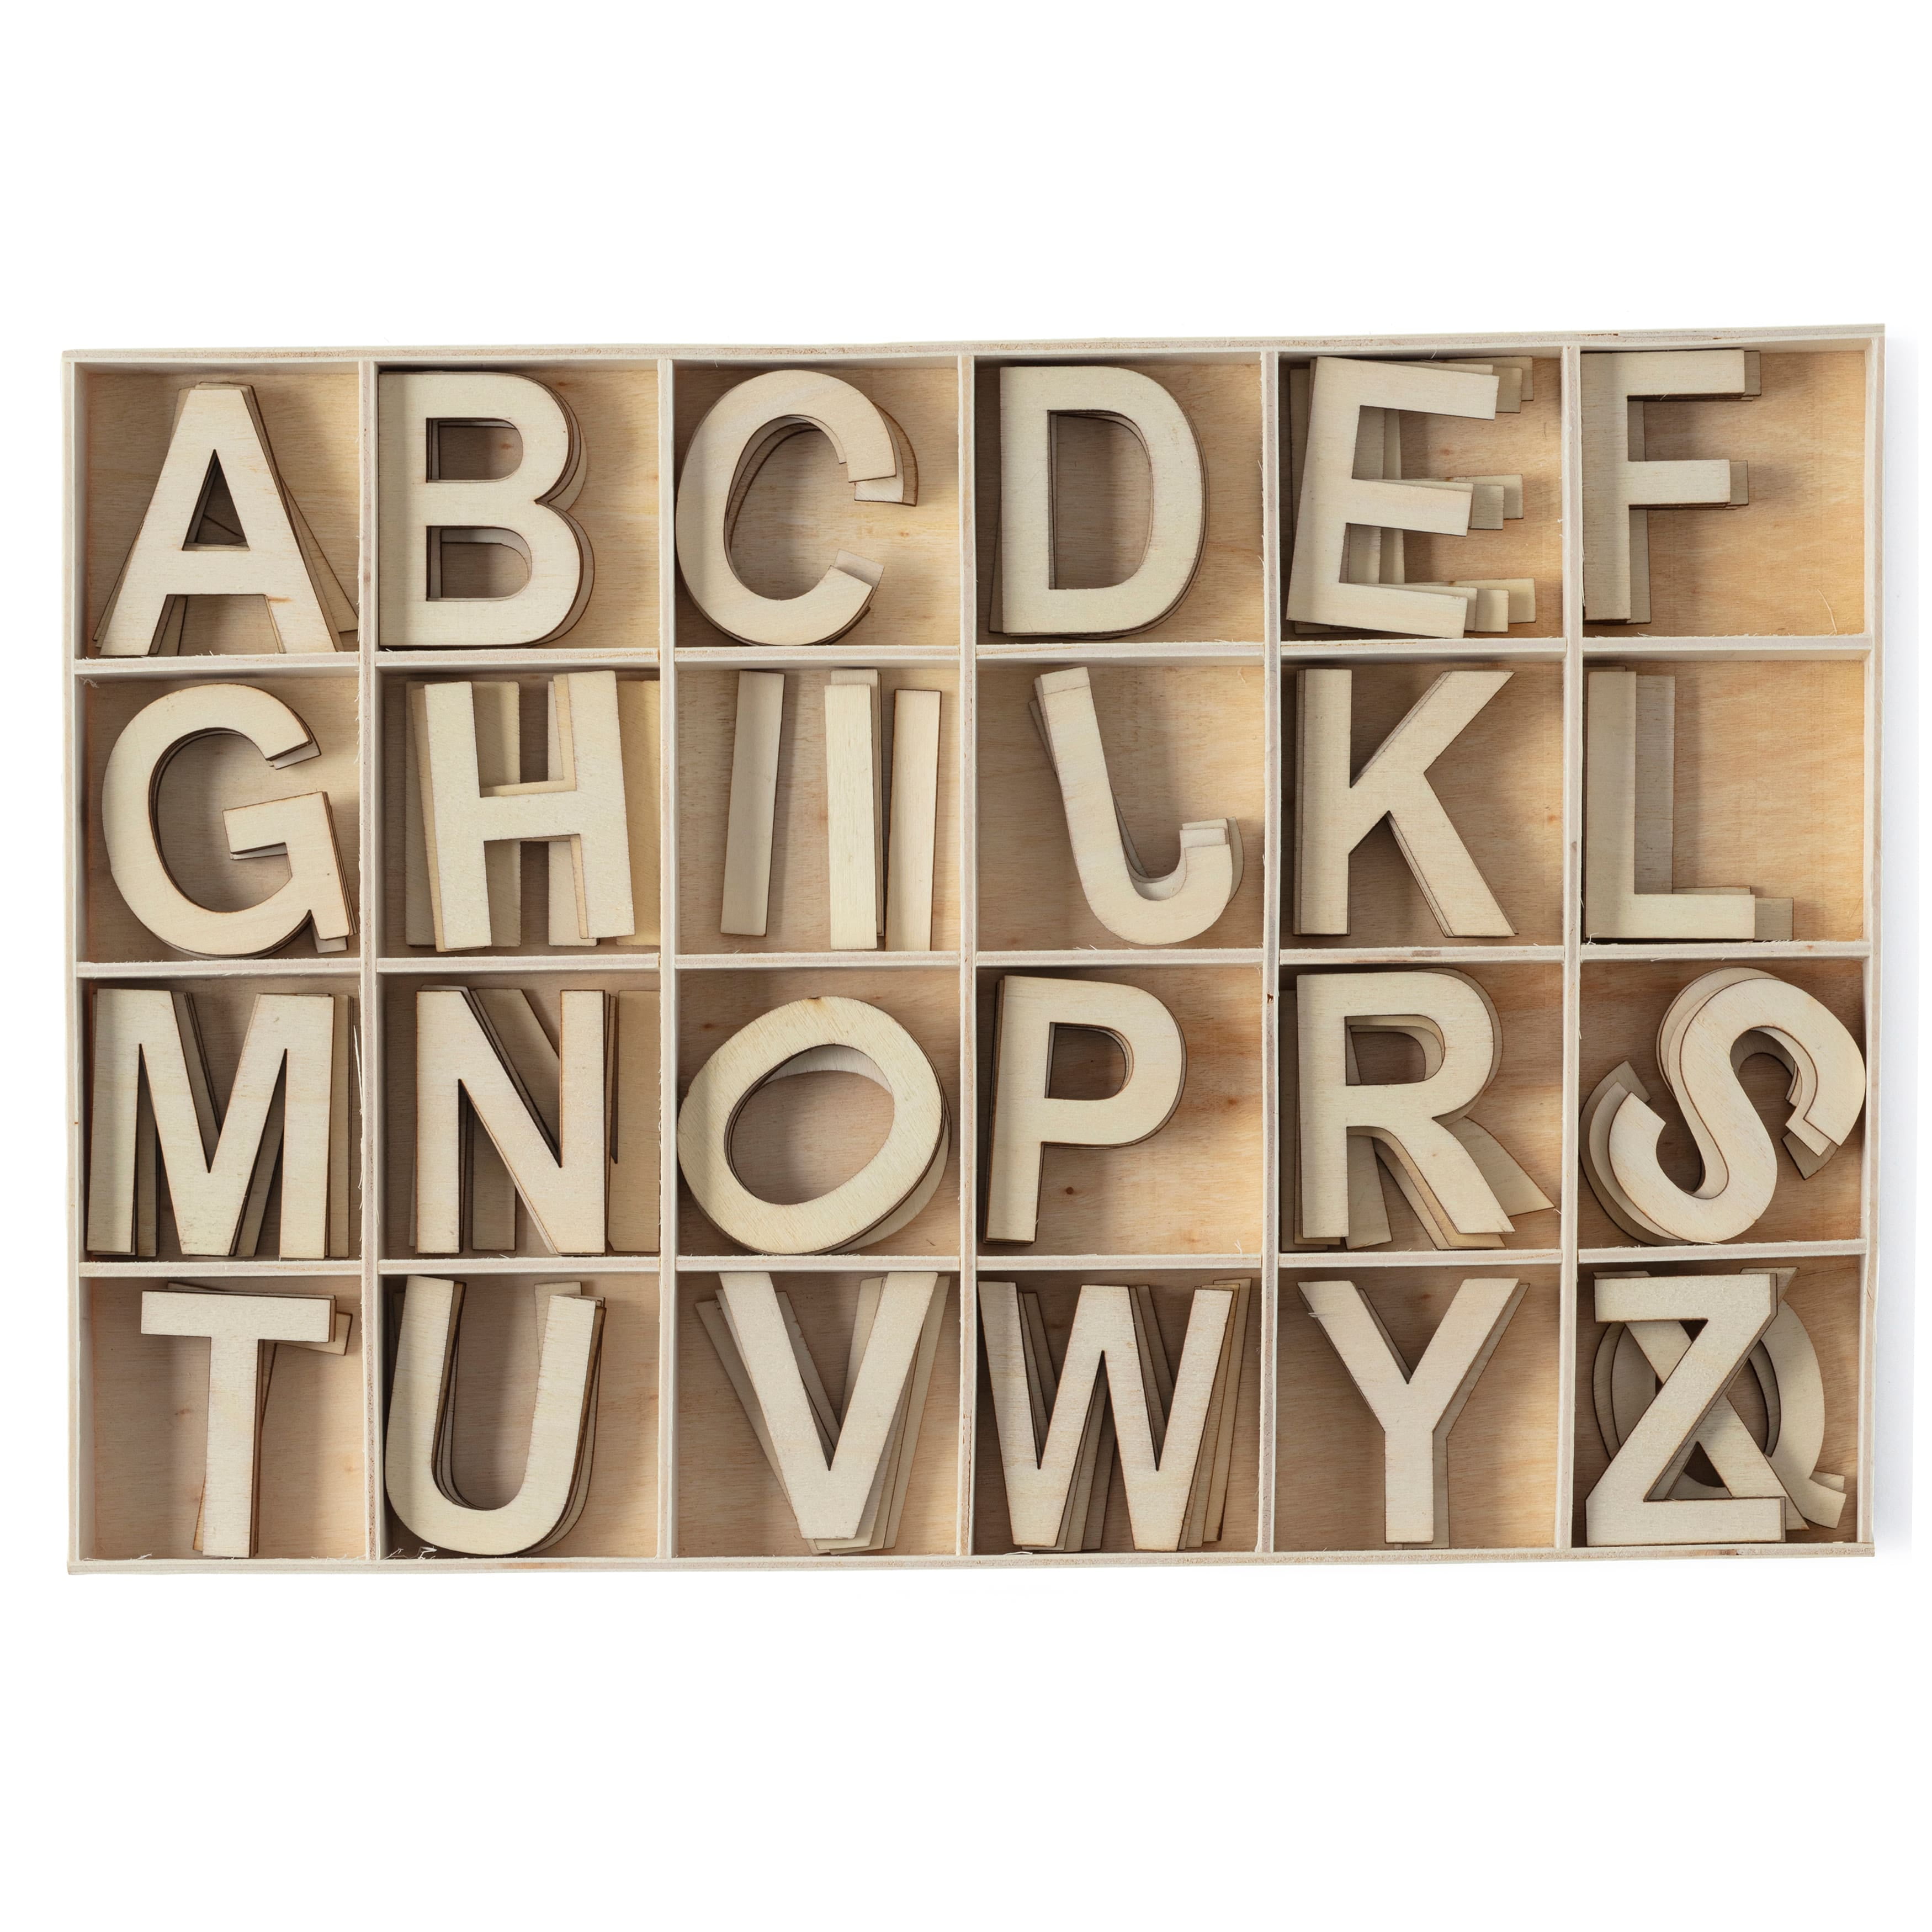 HOTBEST 28/56Pcs Wood Burning Tip Copper Letters Wood Burning Tool Wood  Burning Alphabet Template Branding and Personalization Tool 